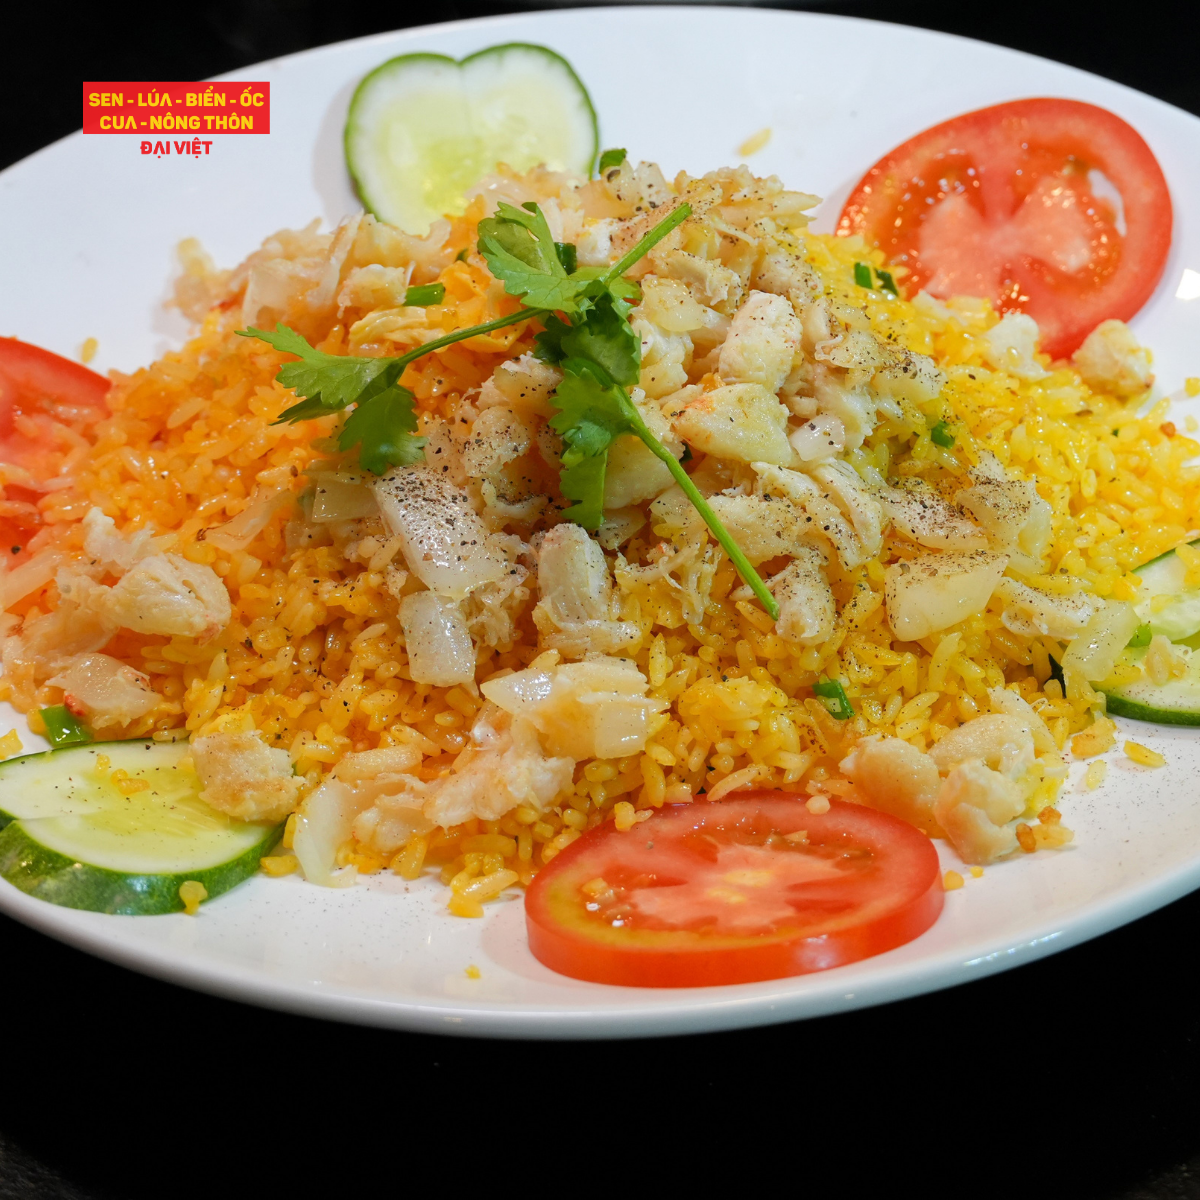  Fried Rice With Crab Meat - Cơm Chiên Cua 